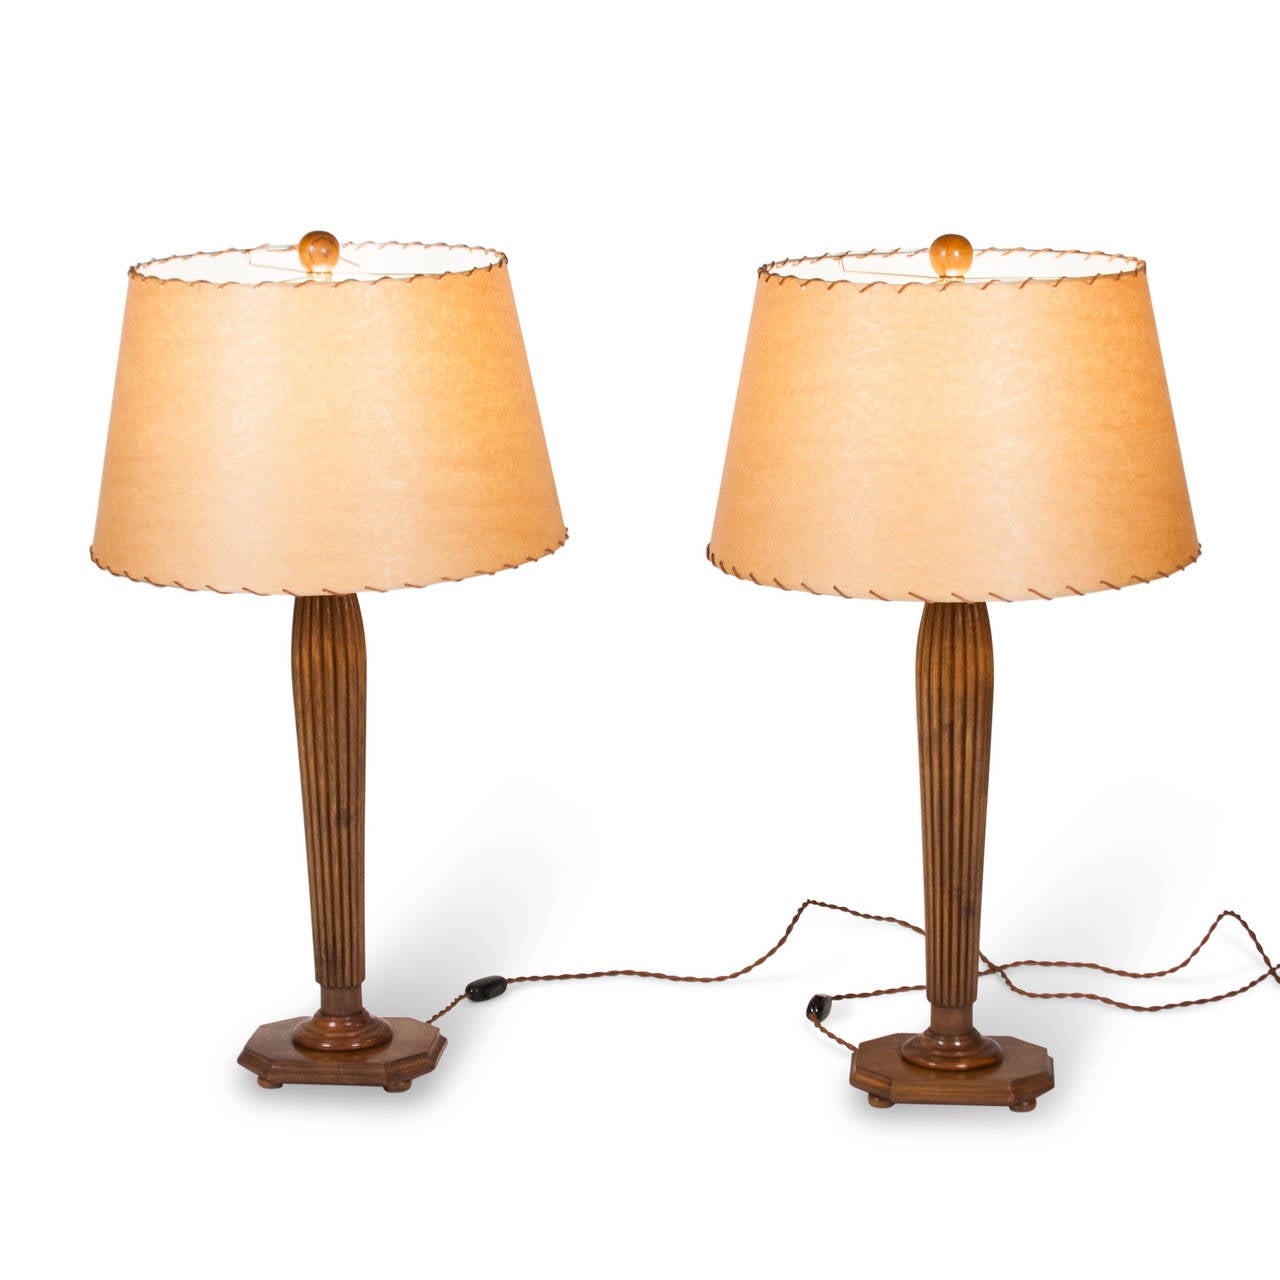 Pair of fluted and tapered column fruitwood table lamps, the column resting on rectangular base with ball feet, in custom stitched parchment paper shades, and having wood ball finial, Italian 1960s. With paper label to underside from Rome gallery.